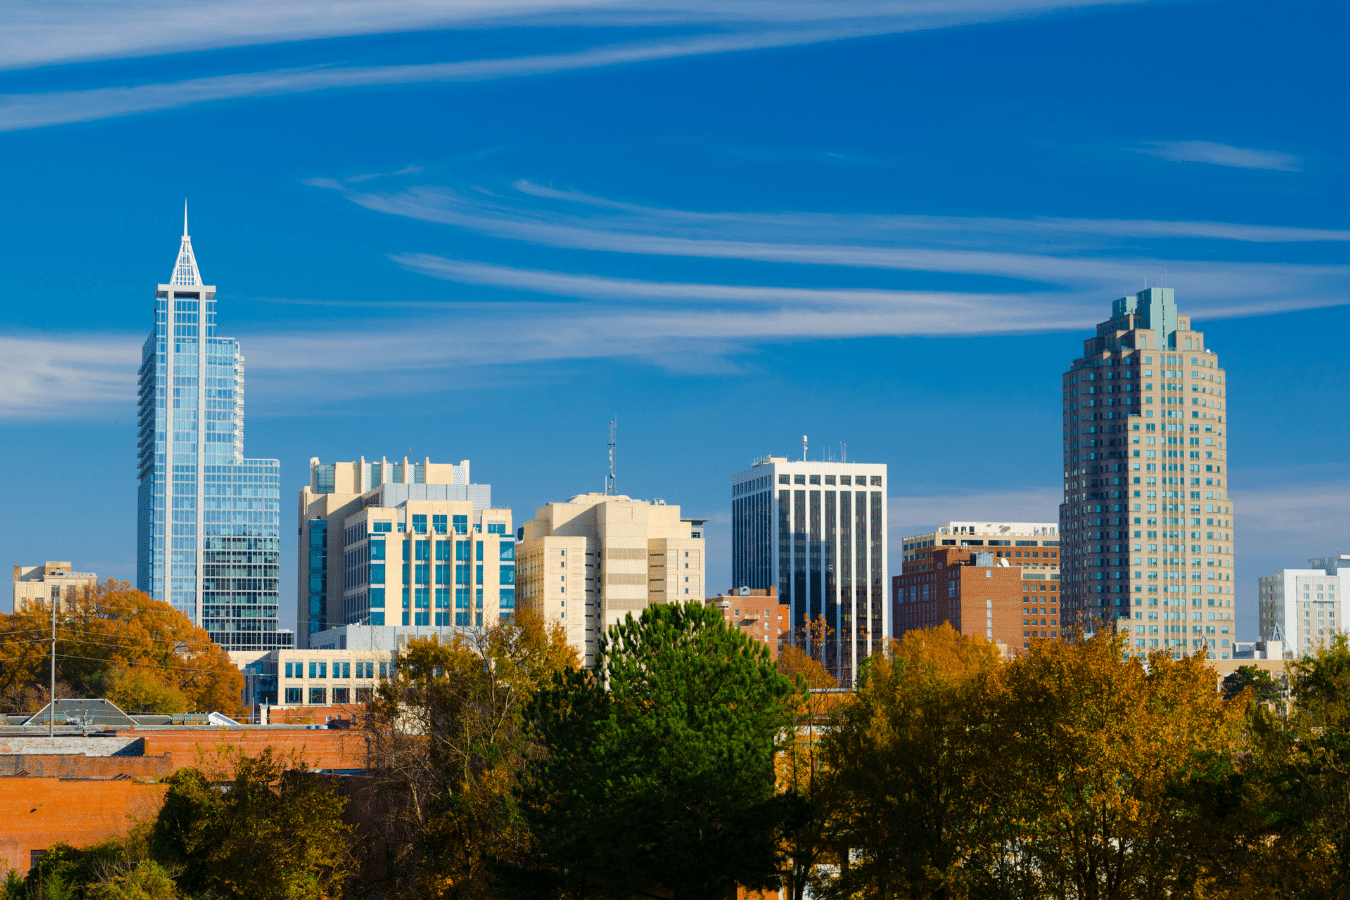 City of Raleigh North Carolina on a bright sunny day